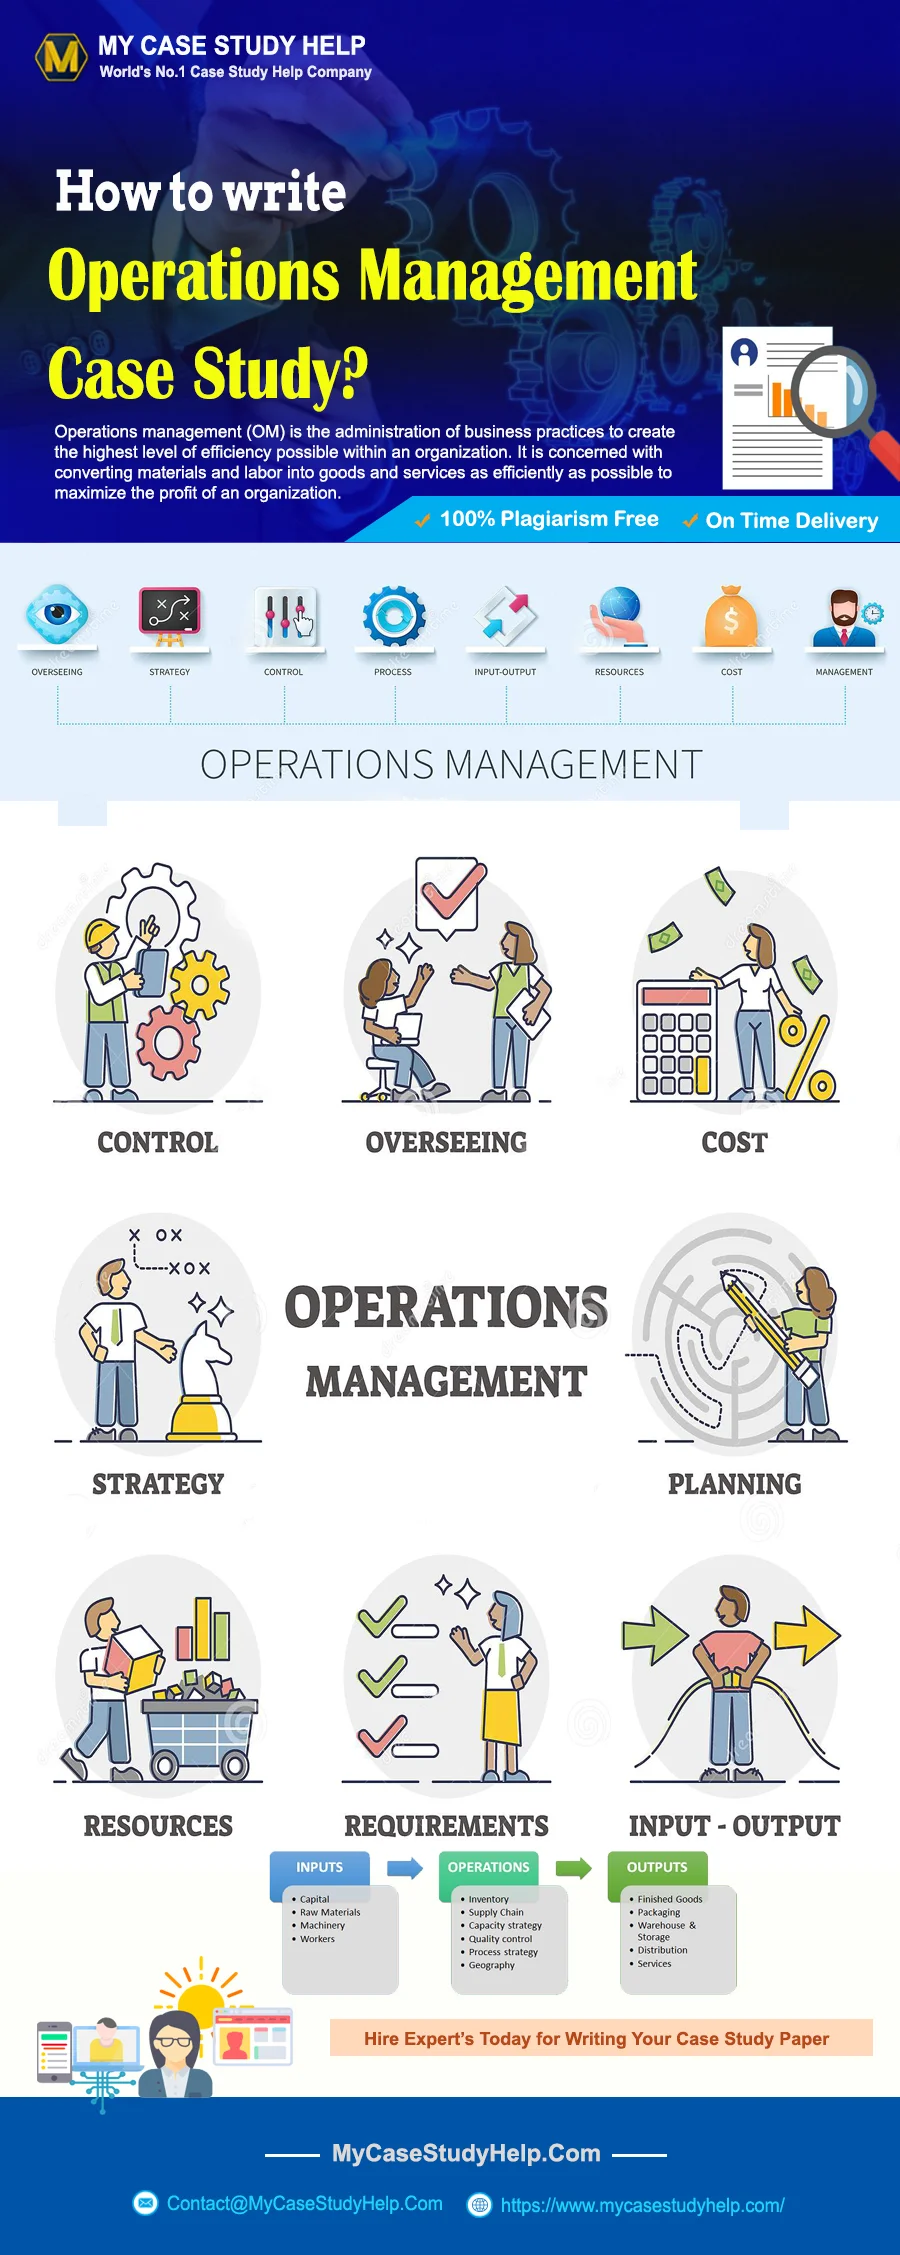 How To Write A Operations Management Case Study?